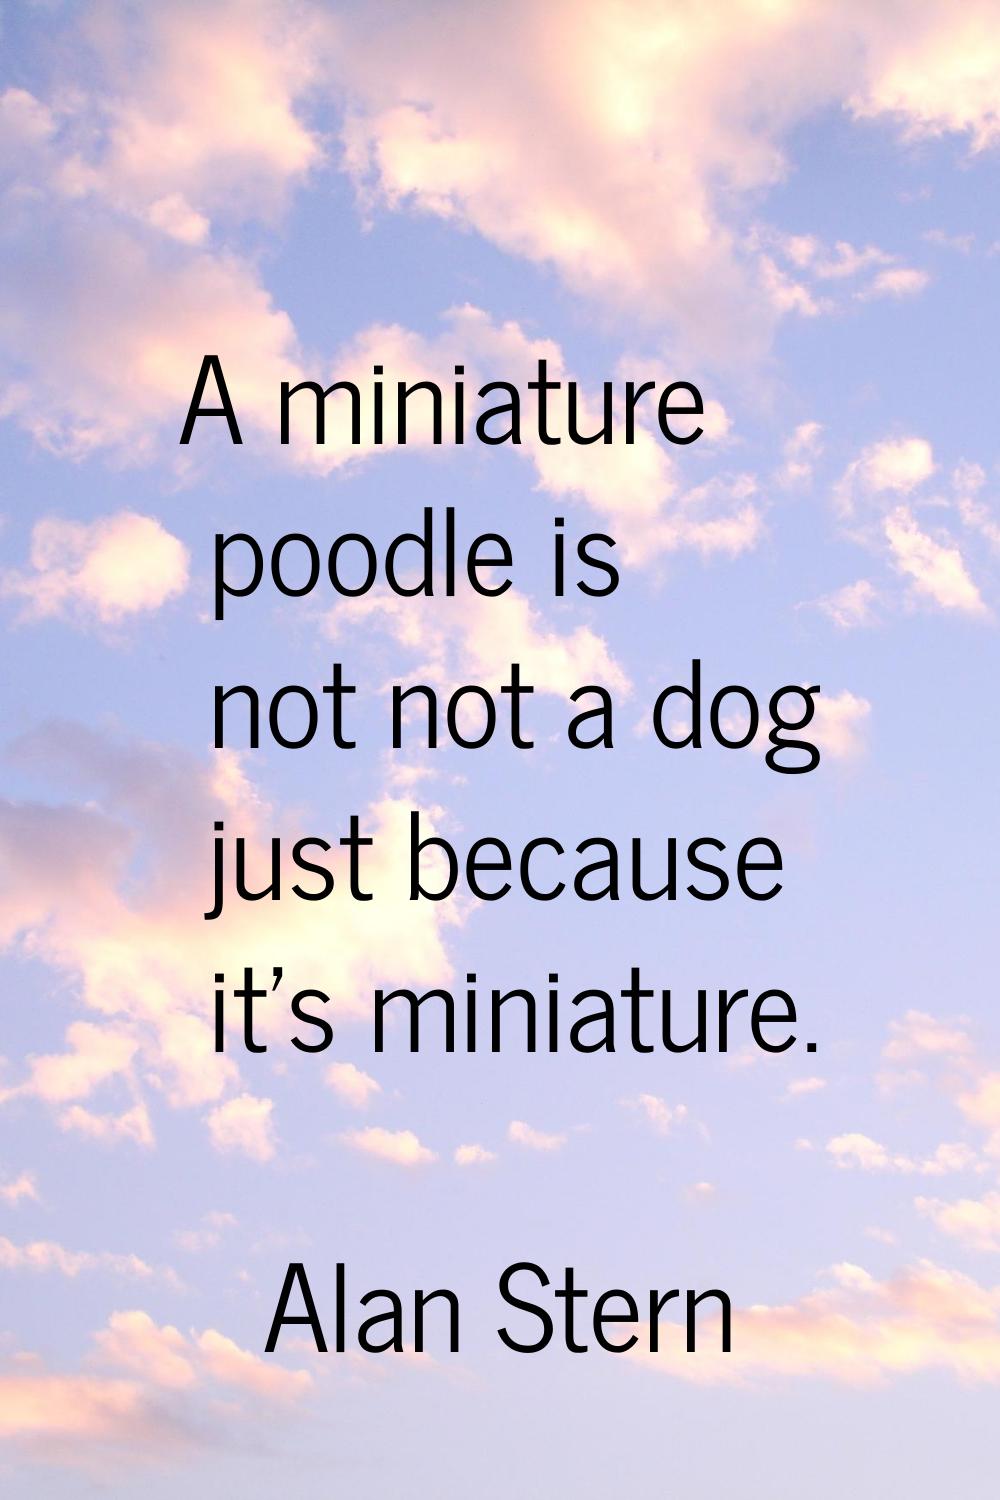 A miniature poodle is not not a dog just because it's miniature.